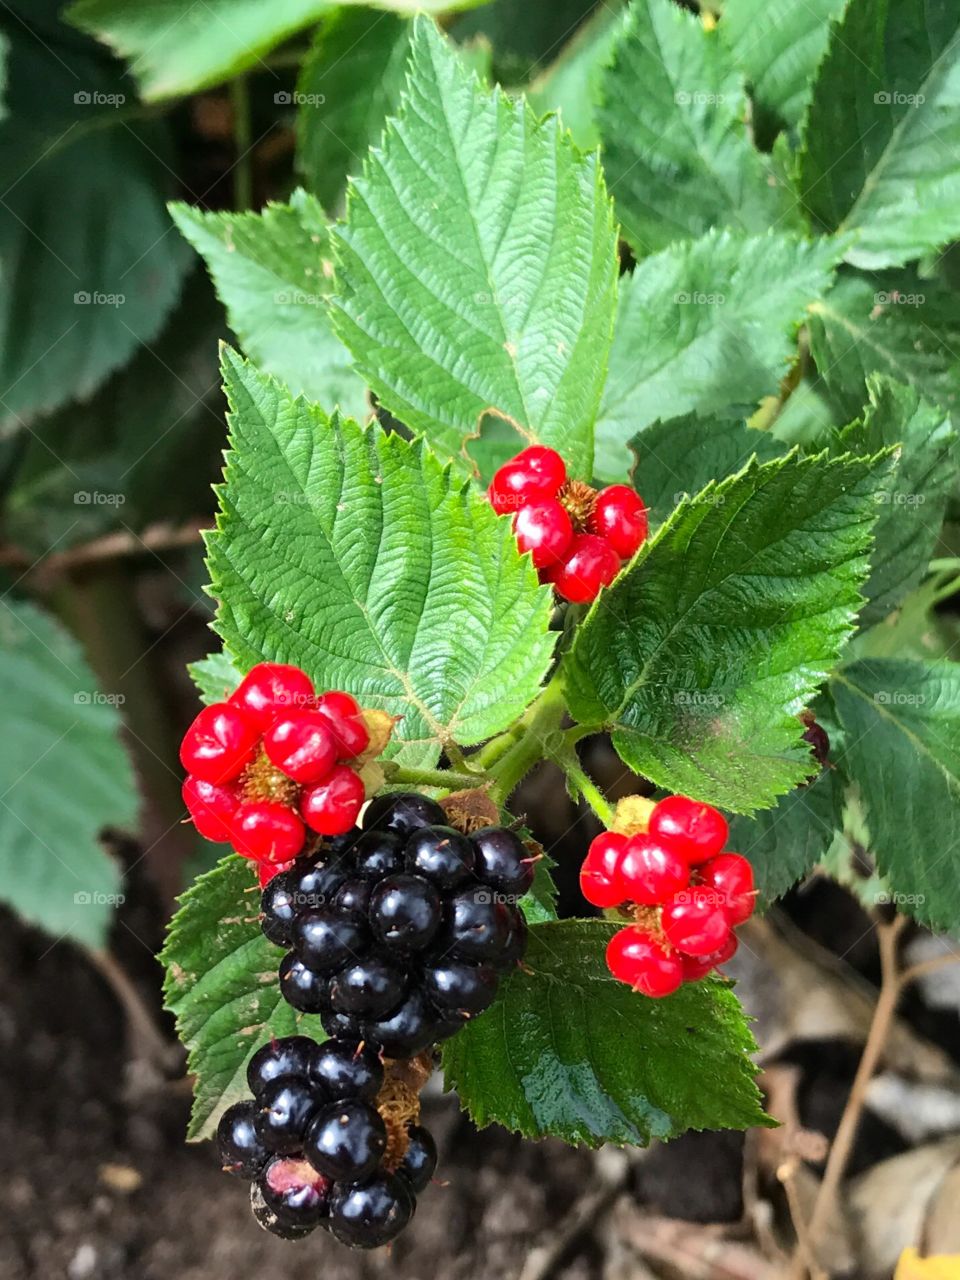 Blackberry ripe and not